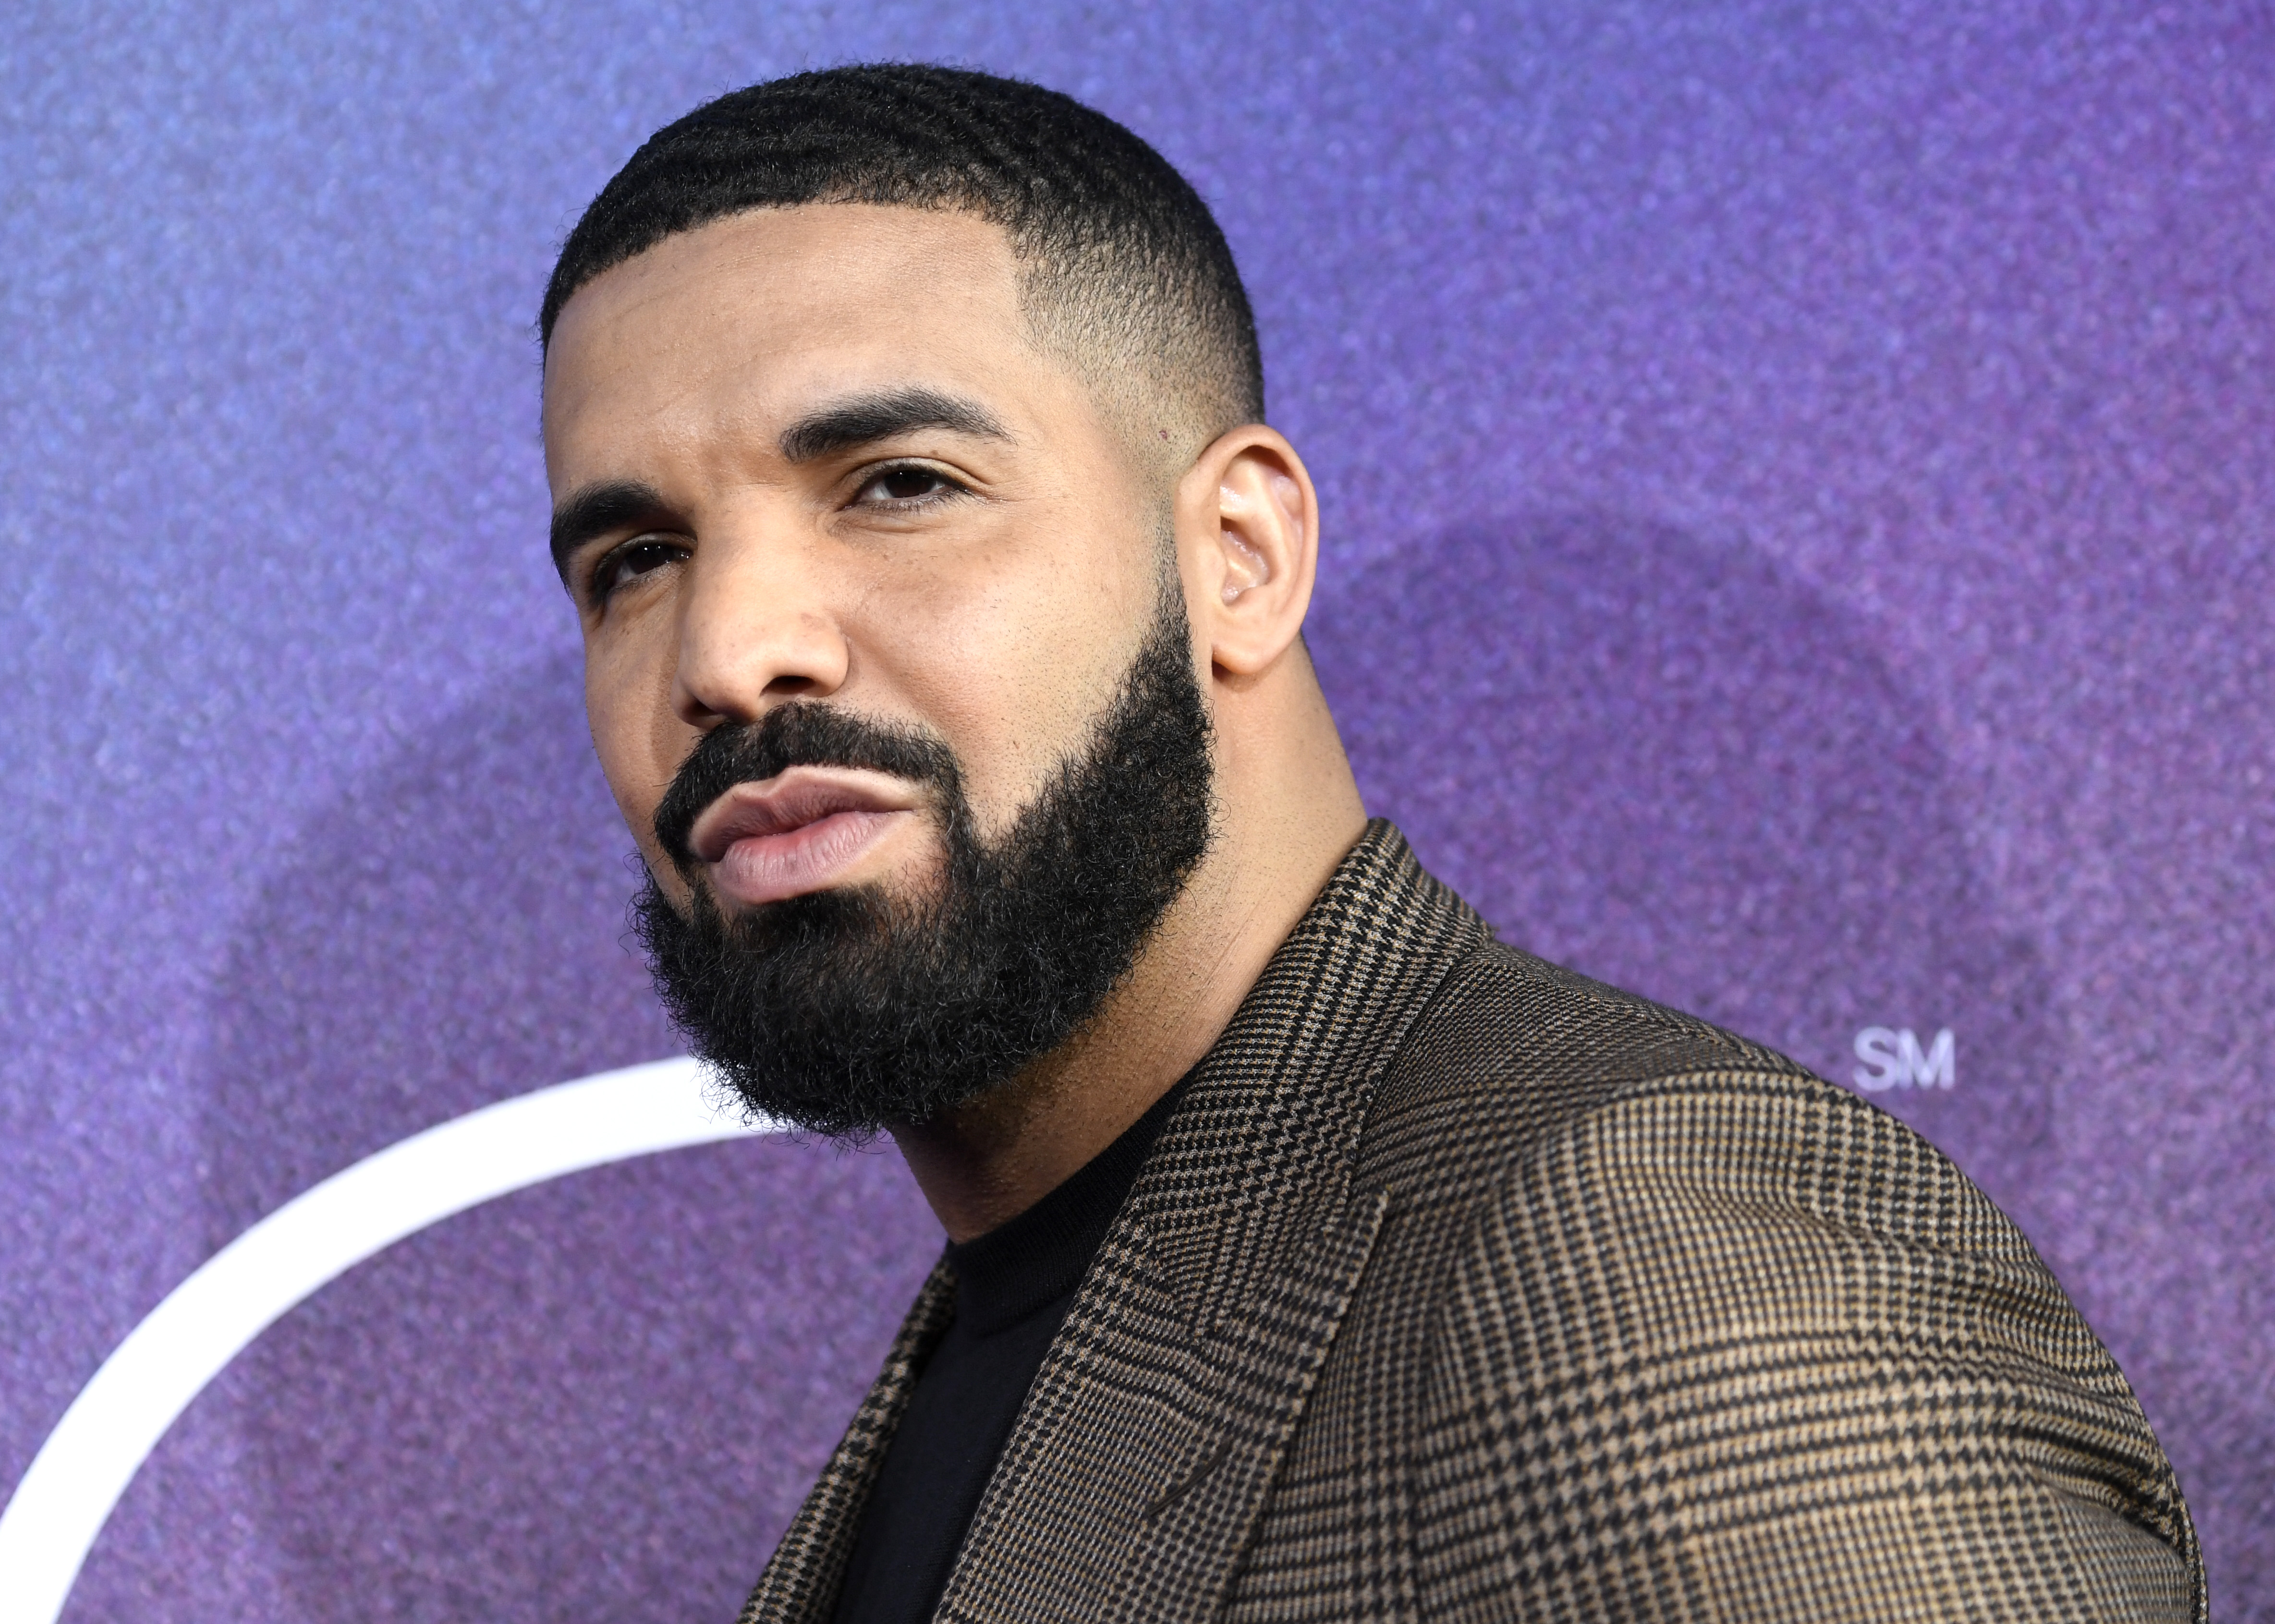 Baltimore City Gets In The Meme Game With Drake S Hotline Bling To Encourage Social Distancing Cbs Baltimore